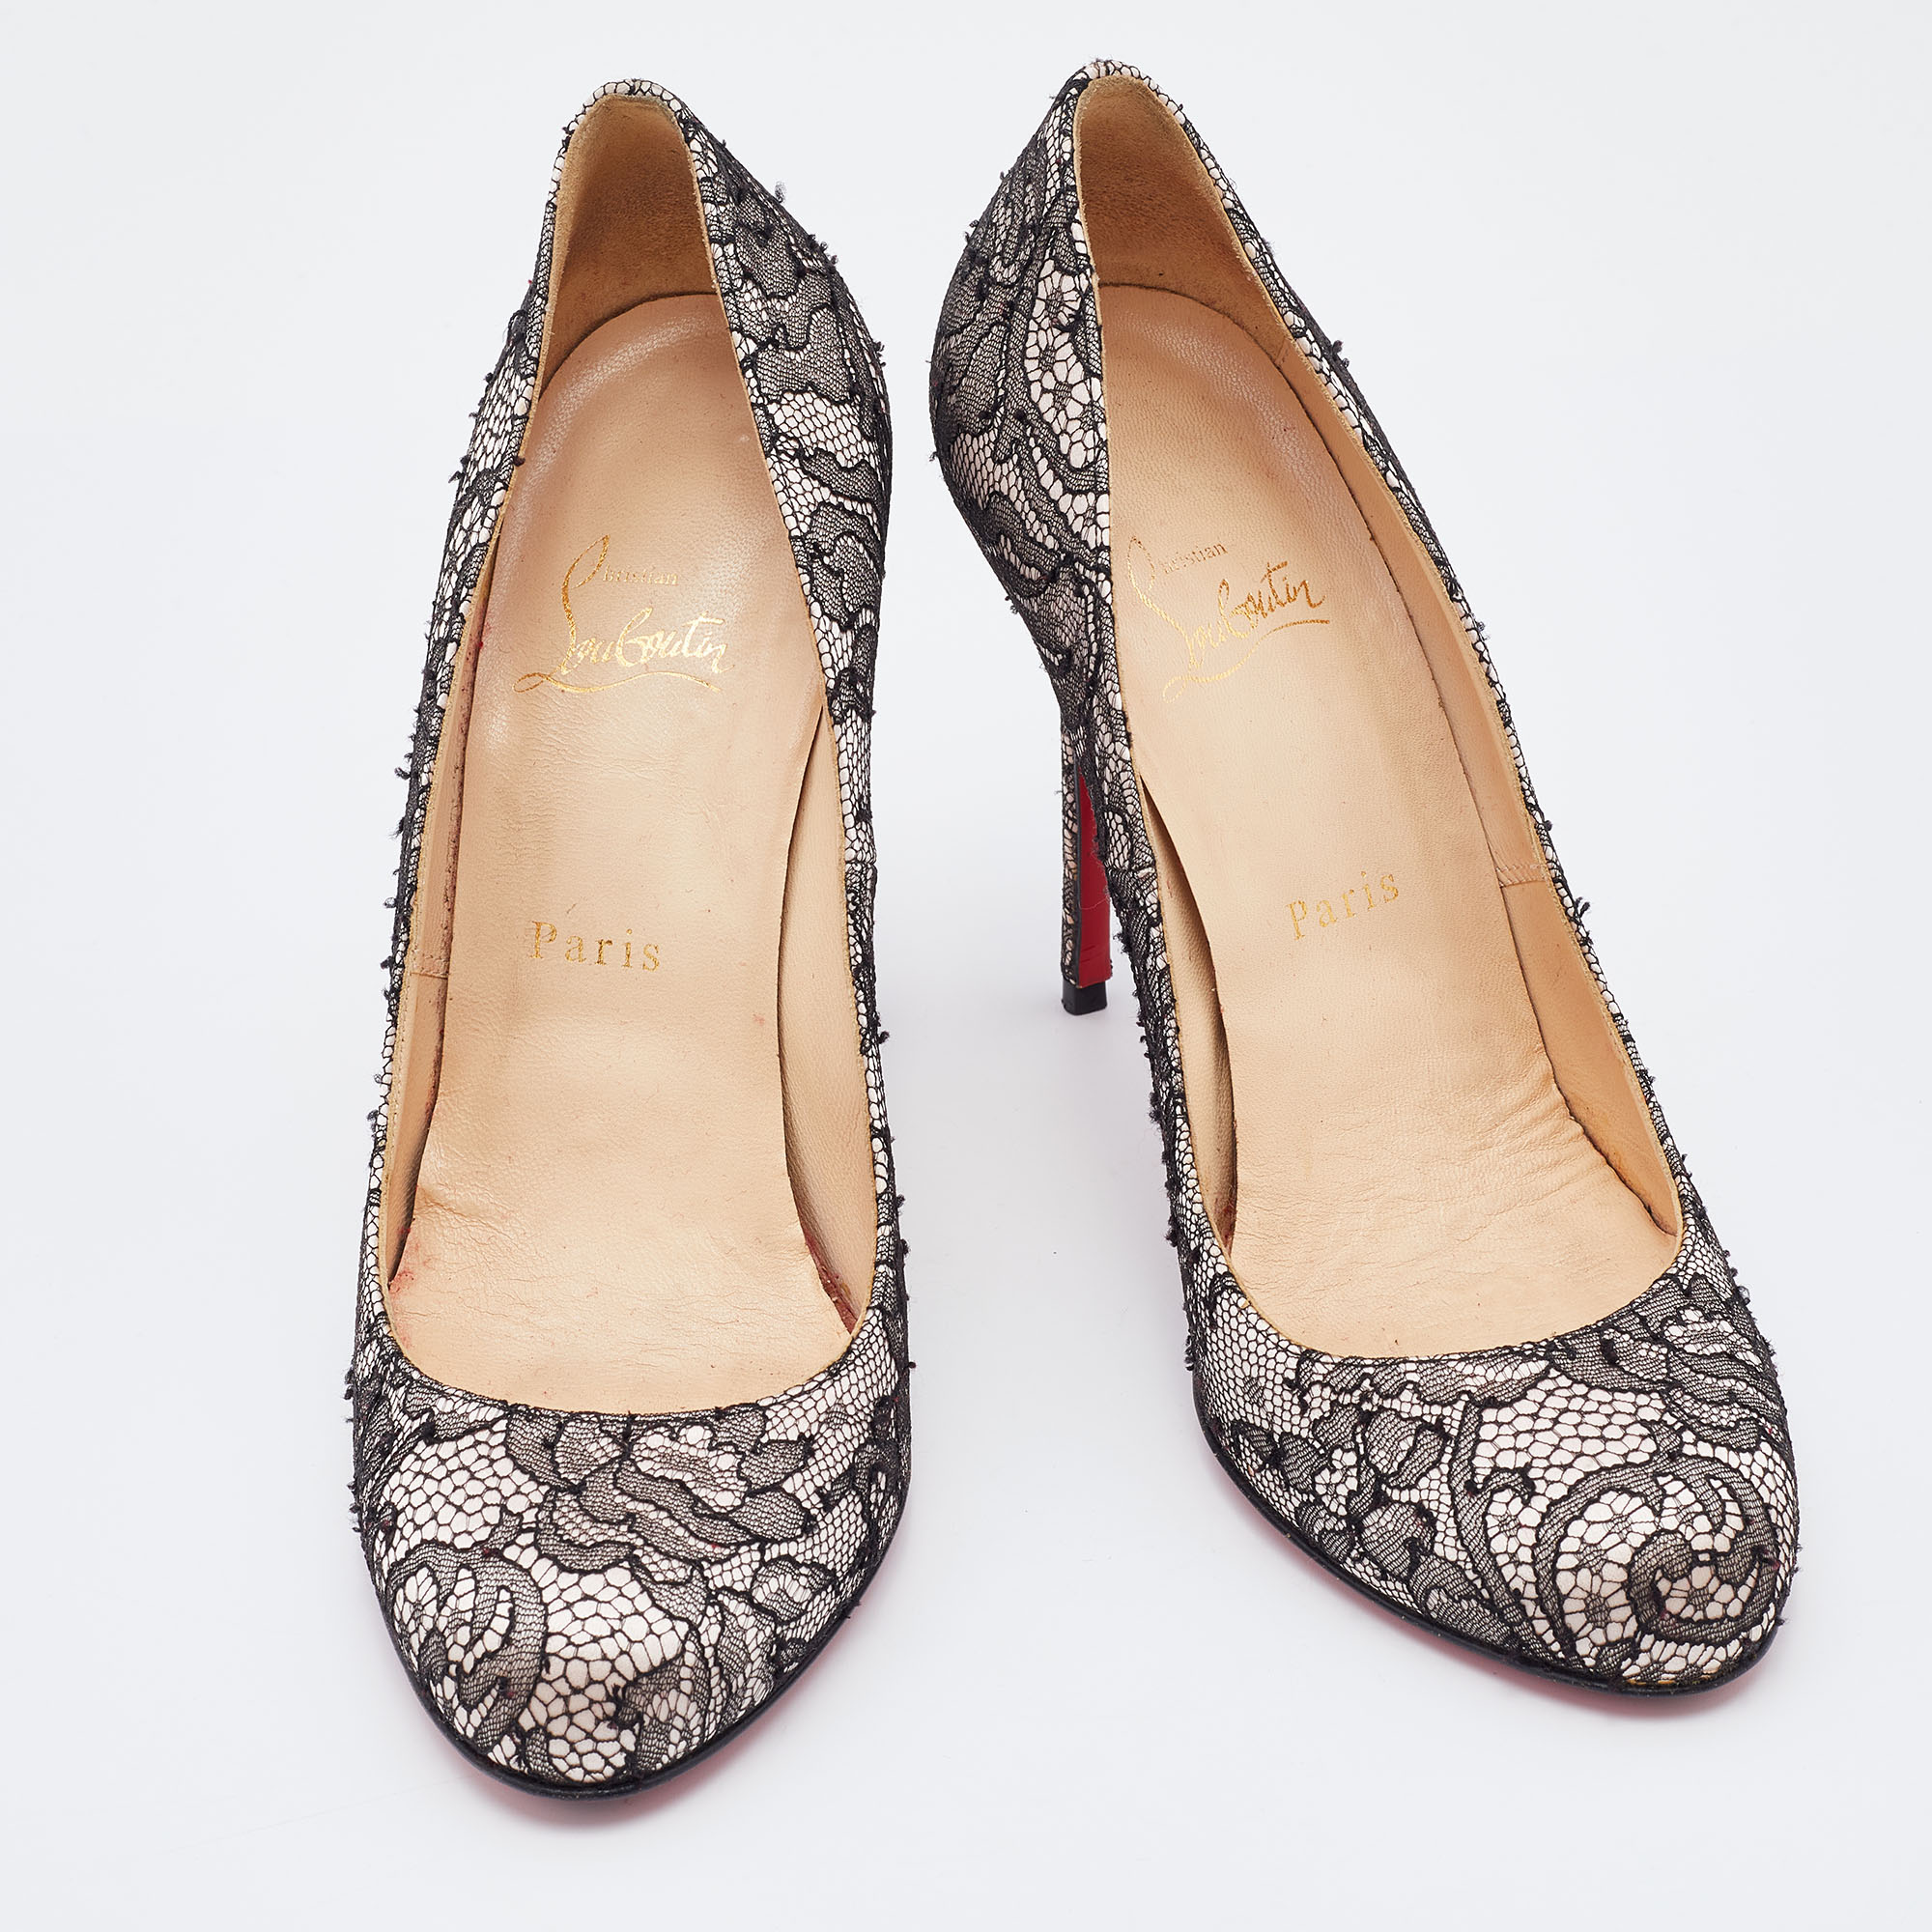 Christian Louboutin Black/Beige Lace And Satin Fifi Round Toe Pumps Size 39